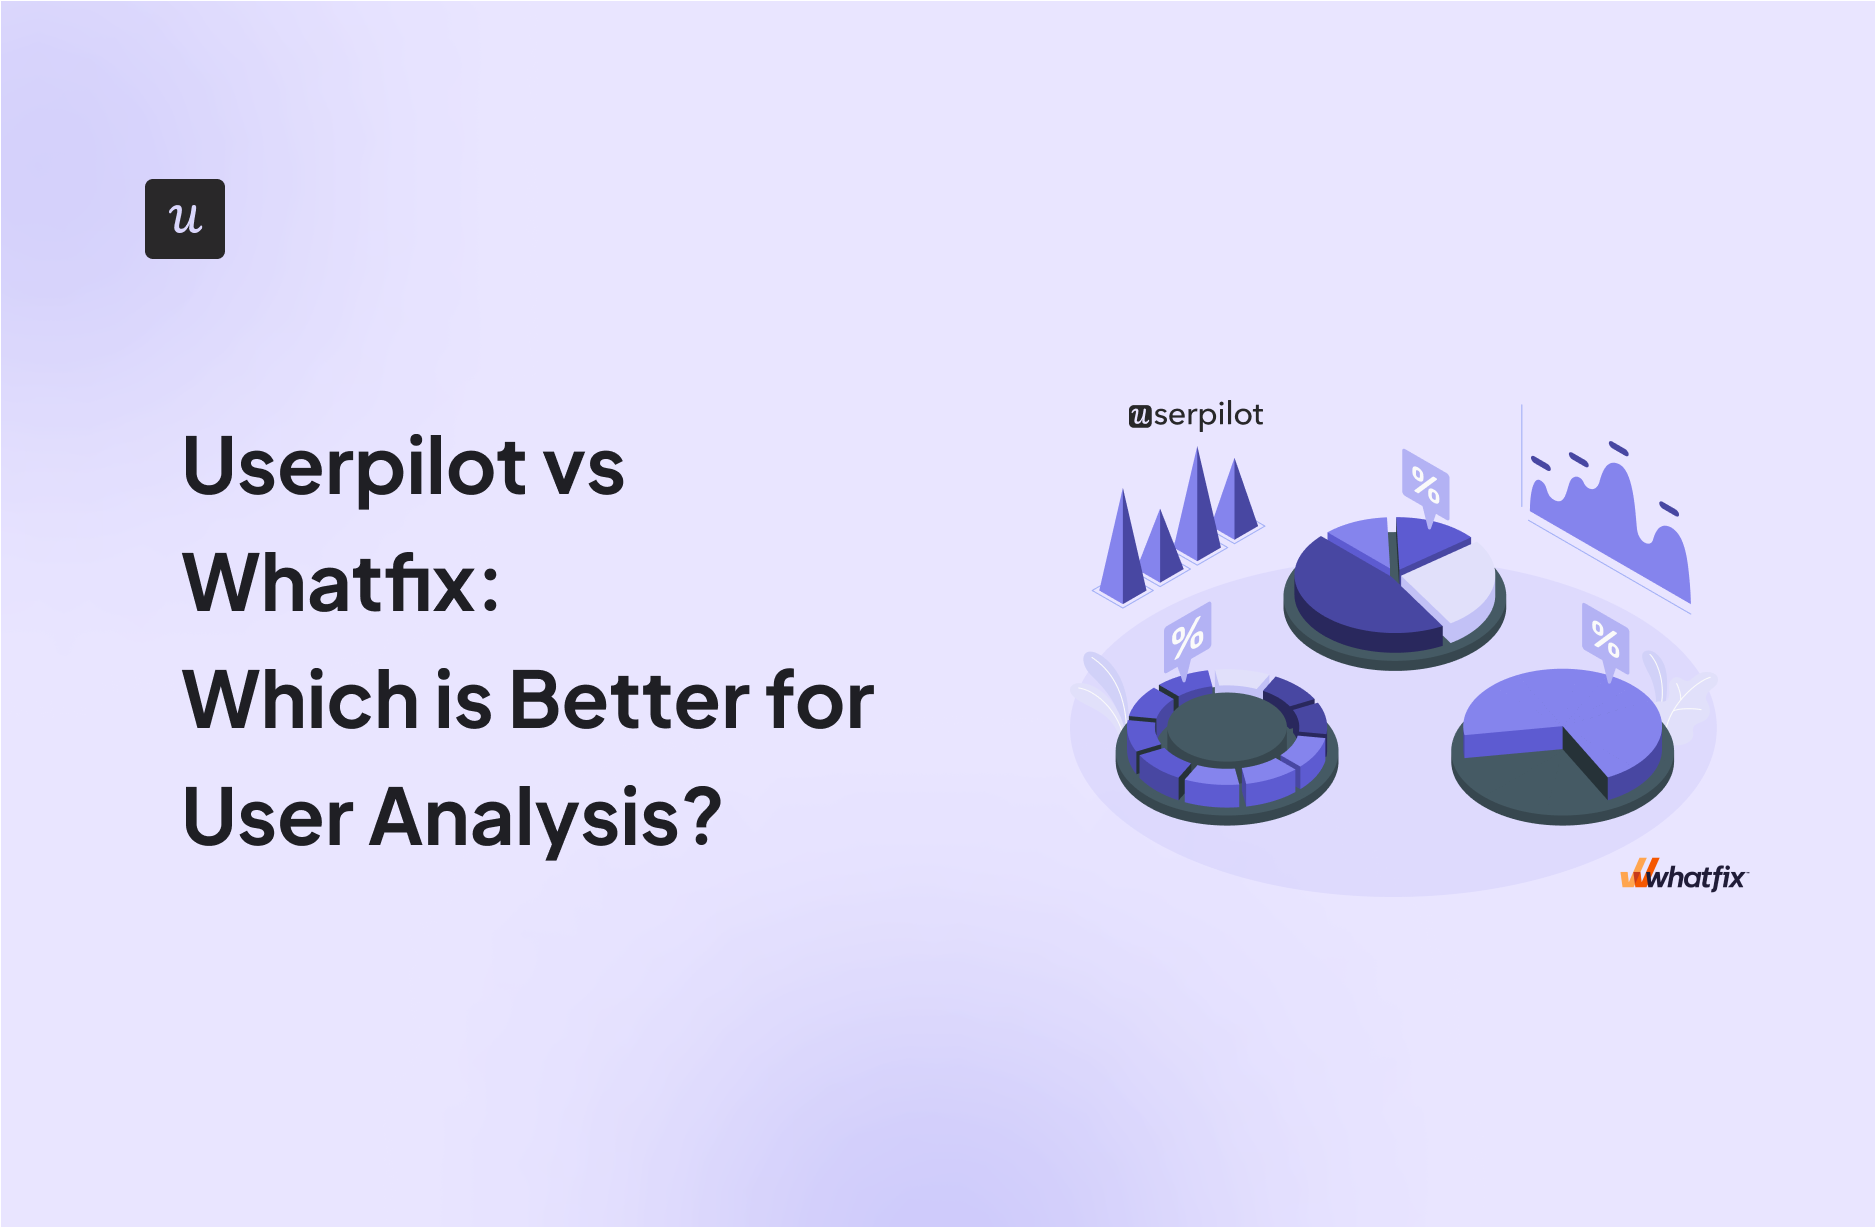 Userpilot vs Whatfix: Which is Better for User Analysis?